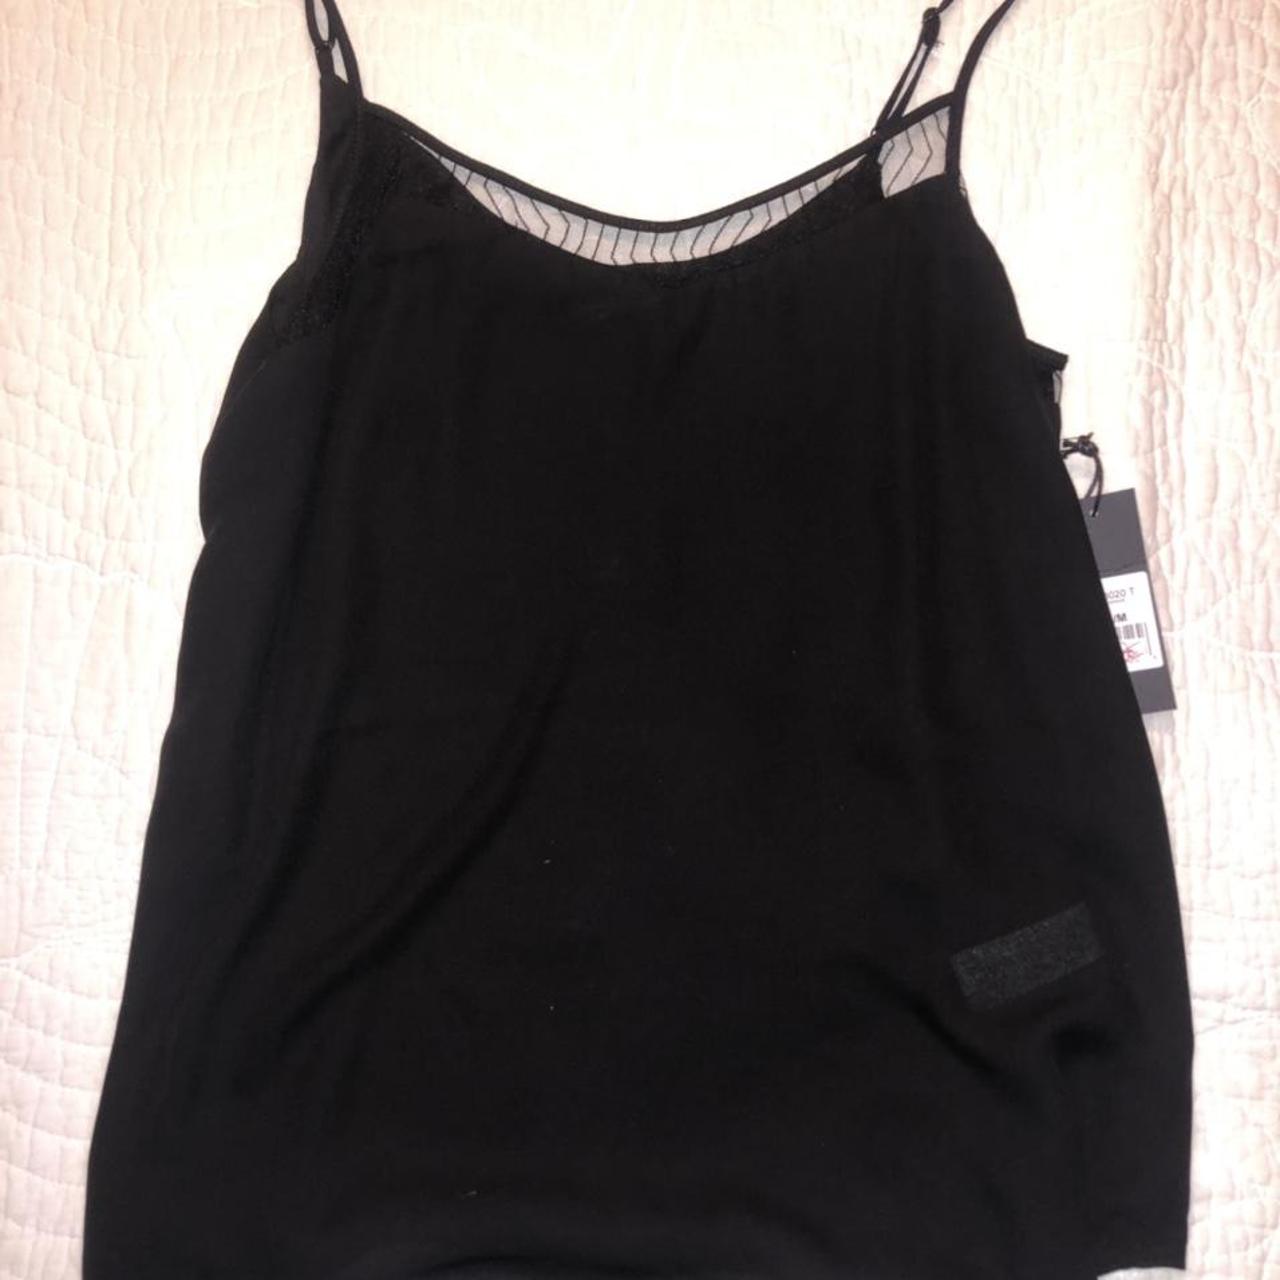 Product Image 1 - NEW WITH TAGS black tank